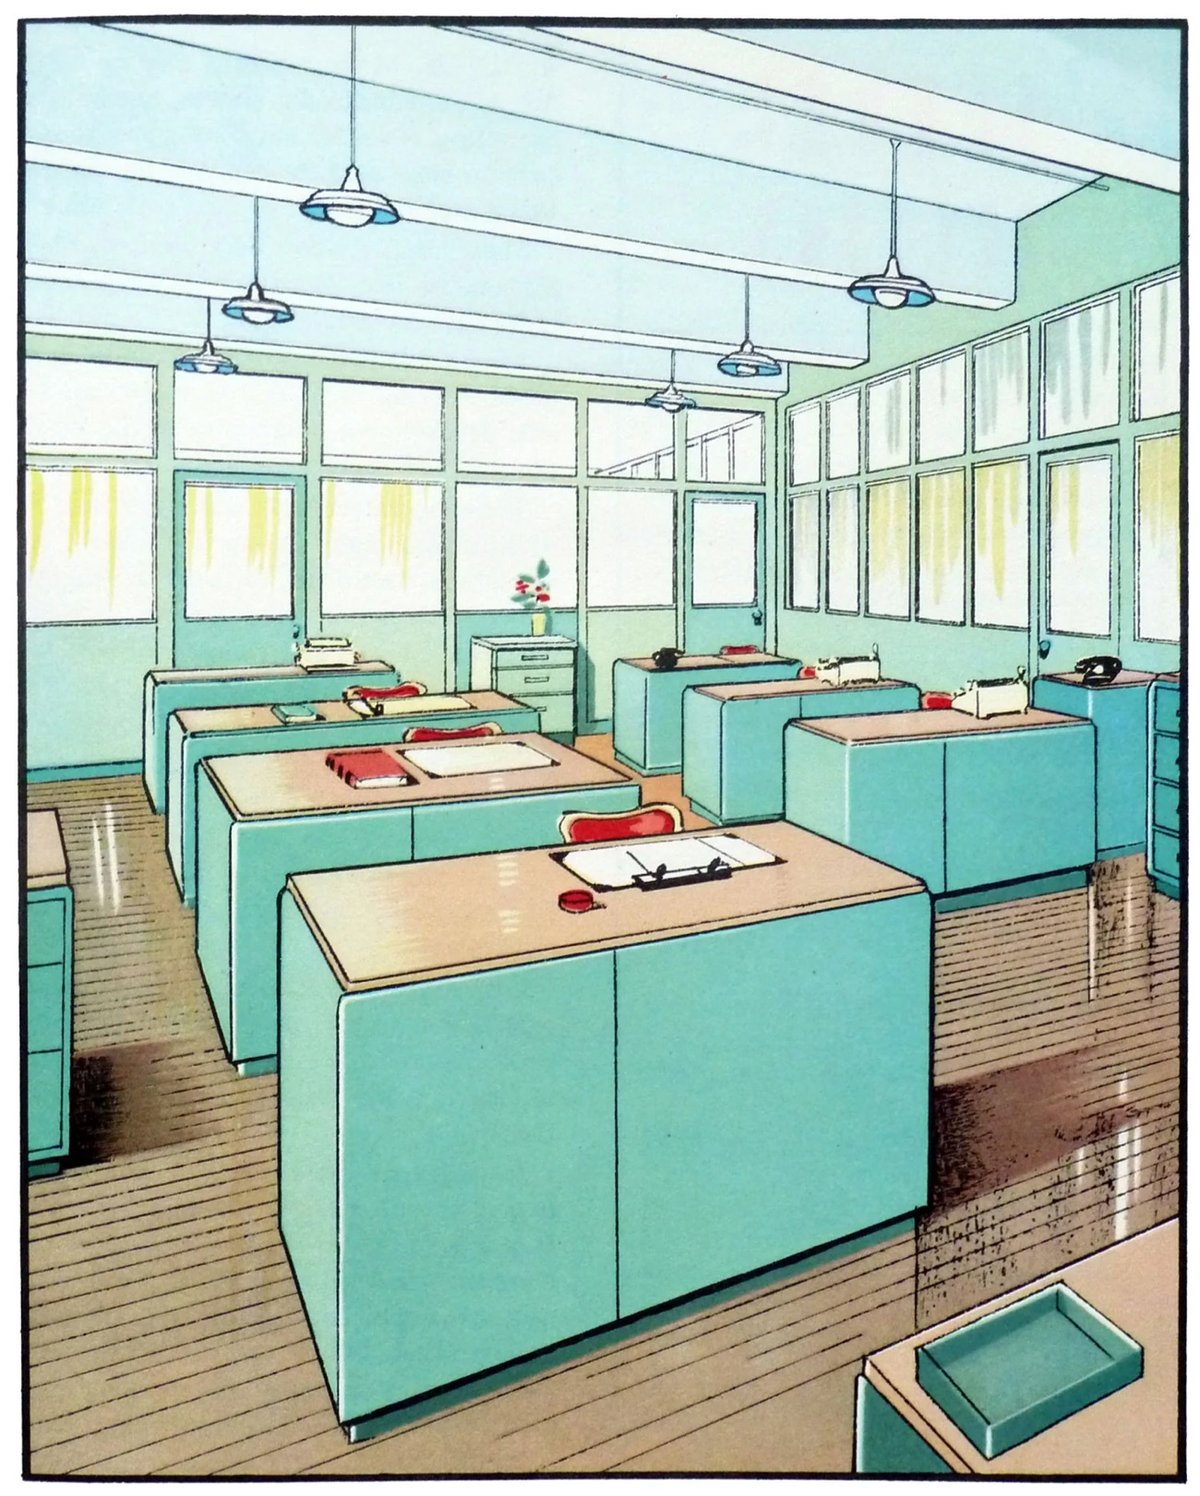 An illustration of a tidy classroom with aqua-colored desks, each with a red chair and an open book, lit by natural light from large windows and overhead lights.